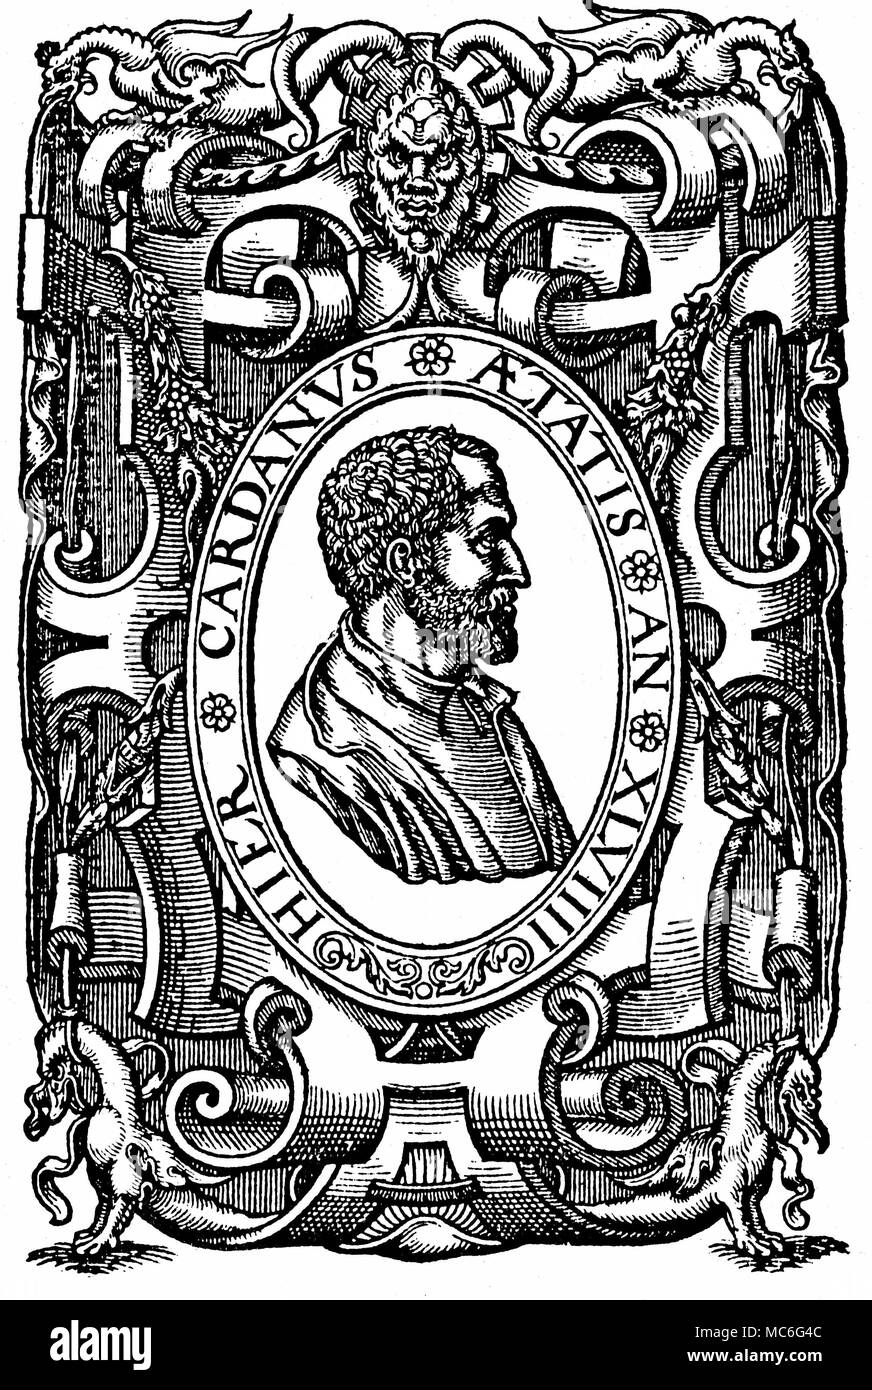 OCCULTISTS - JEROME CARDAN Woodcut portrait of the mathematician, astrologer and physician, Jerome Cardan (or Hieronimus Cardanus, in the Latin form), at the age of 49 - that is, at the age of 7 x 7 - a sacred number. Loose print, but probably once from a copy of Cardan's translation of the Tetrabiblos of Ptolemy. *** Local Caption *** Personalities;image;Mono;Illustration;Esoterica;paranormal Stock Photo